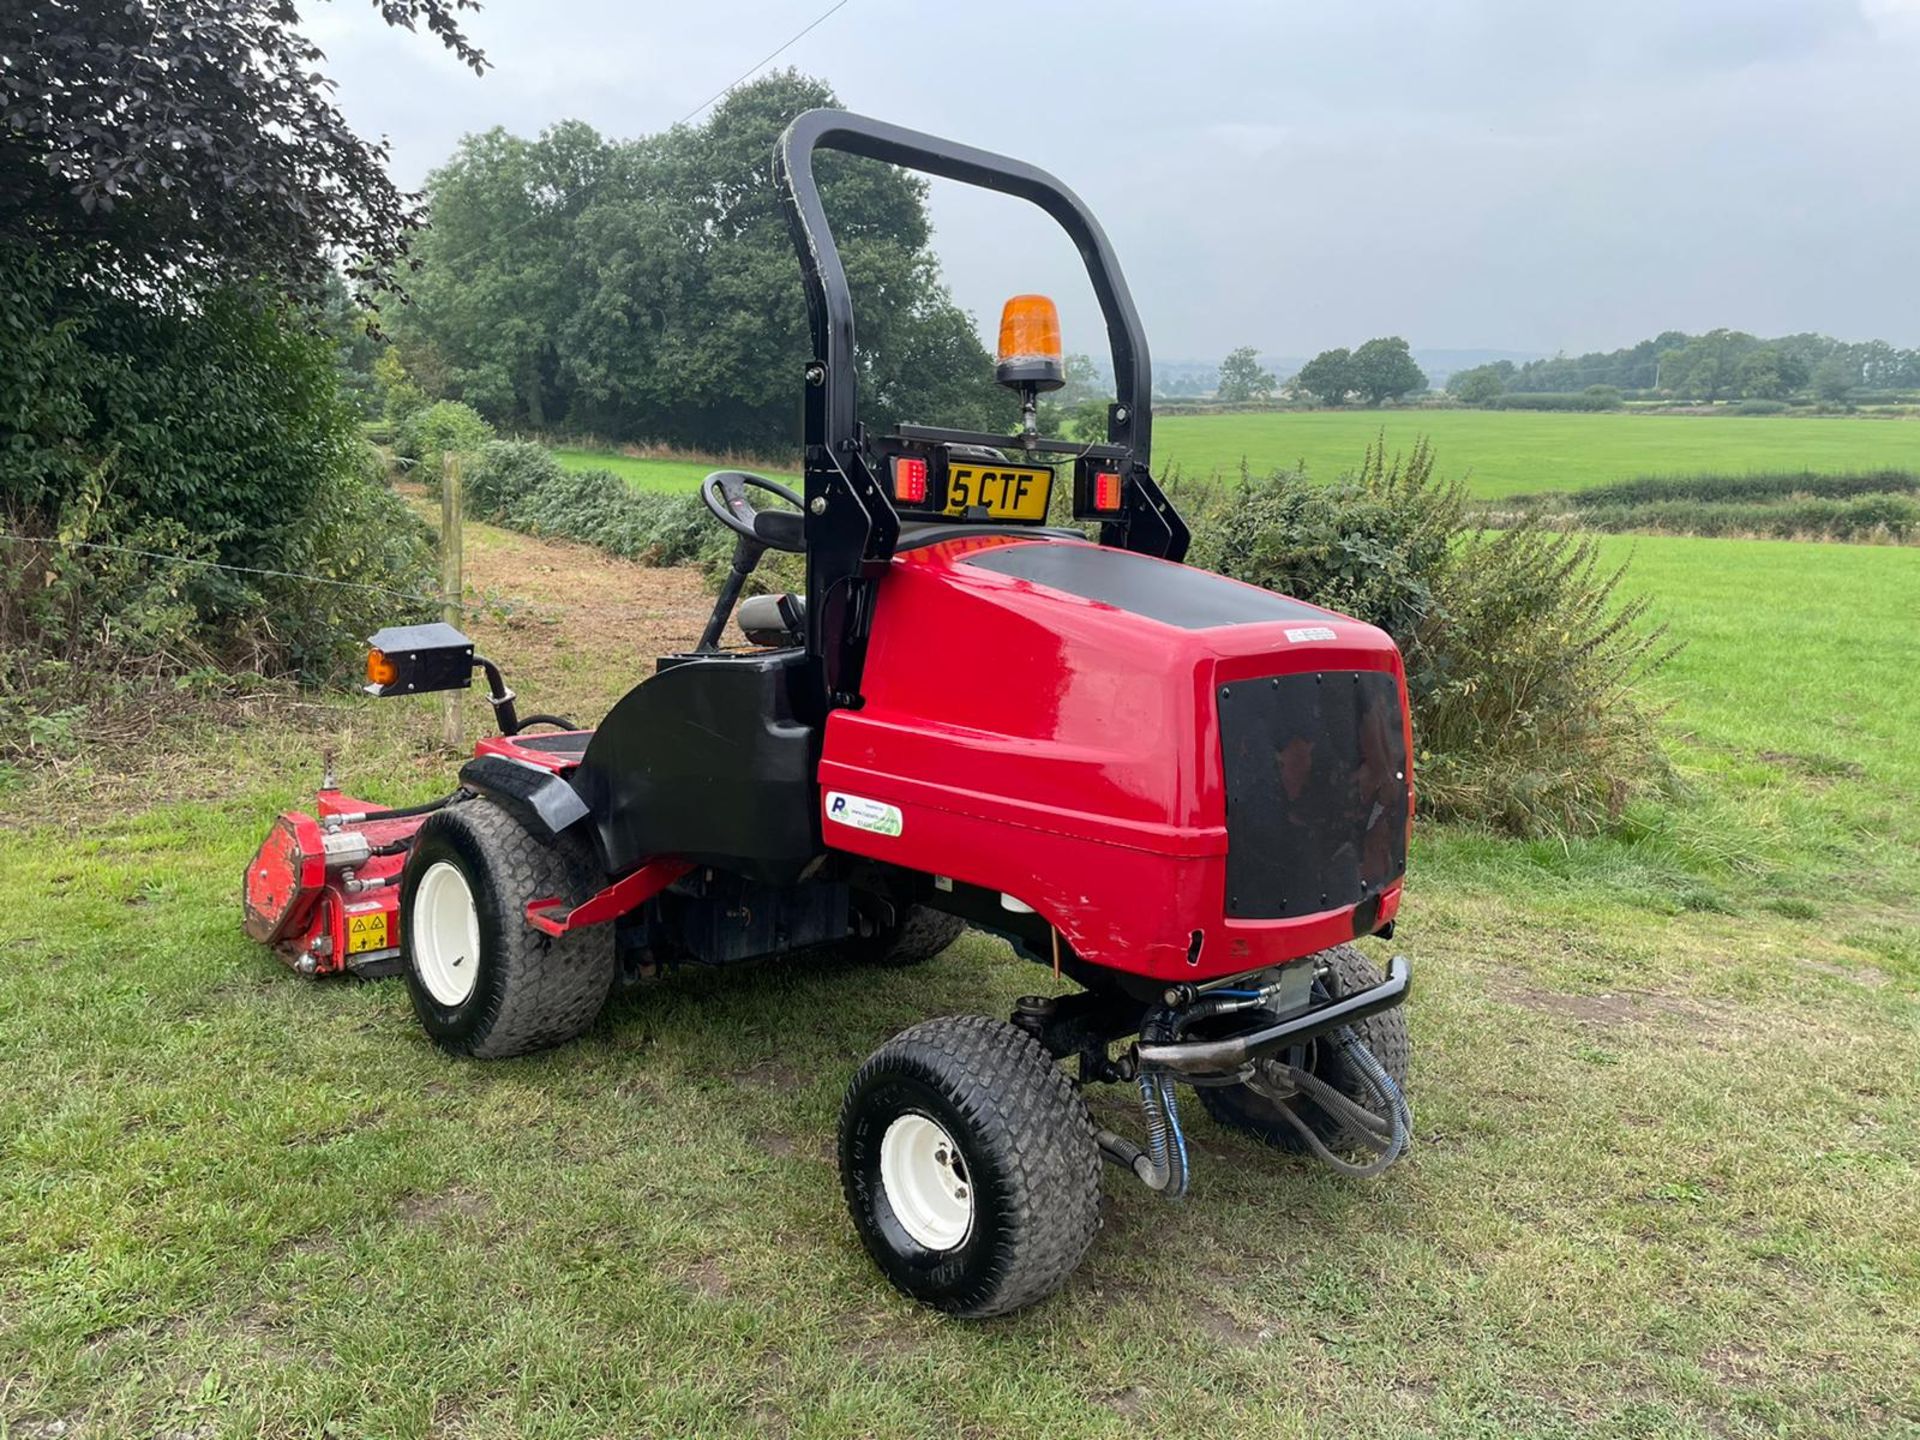 2015 TORO GM3400 4x4 RIDE ON MOWER, RUNS DRIVES CUTS WELL, A LOW AND GENUINE 2345 HOURS *PLUS VAT* - Image 4 of 17